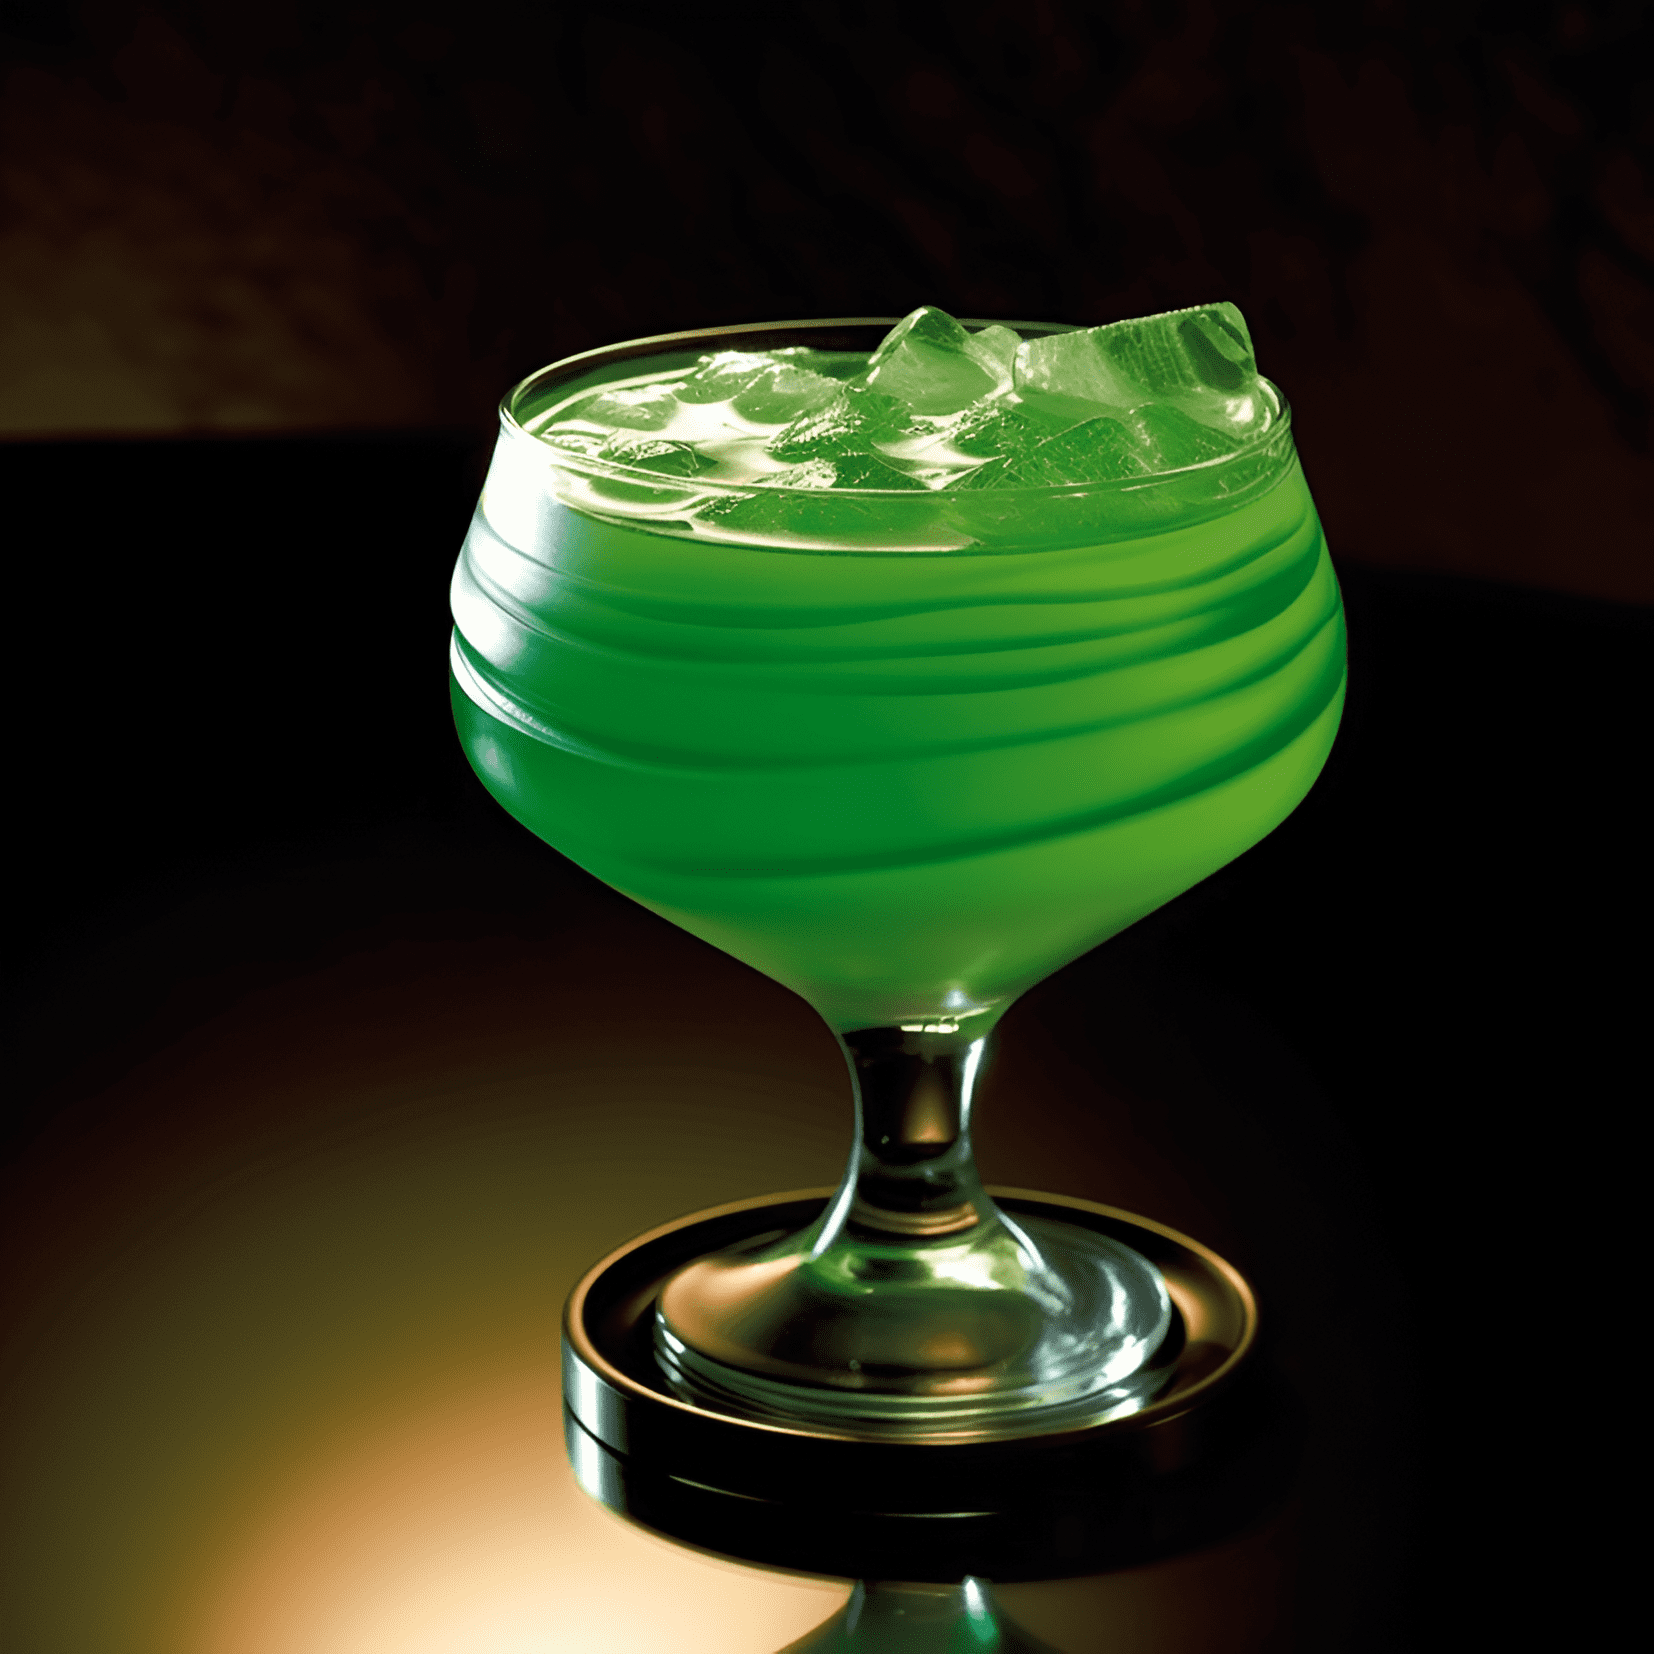 Green Eyes Cocktail Recipe - The Green Eyes cocktail has a sweet, fruity, and slightly tangy taste. The combination of pineapple, lime, and melon flavors creates a refreshing and tropical sensation on the palate. The drink is also light and easy to sip, making it a perfect choice for warm weather or poolside relaxation.